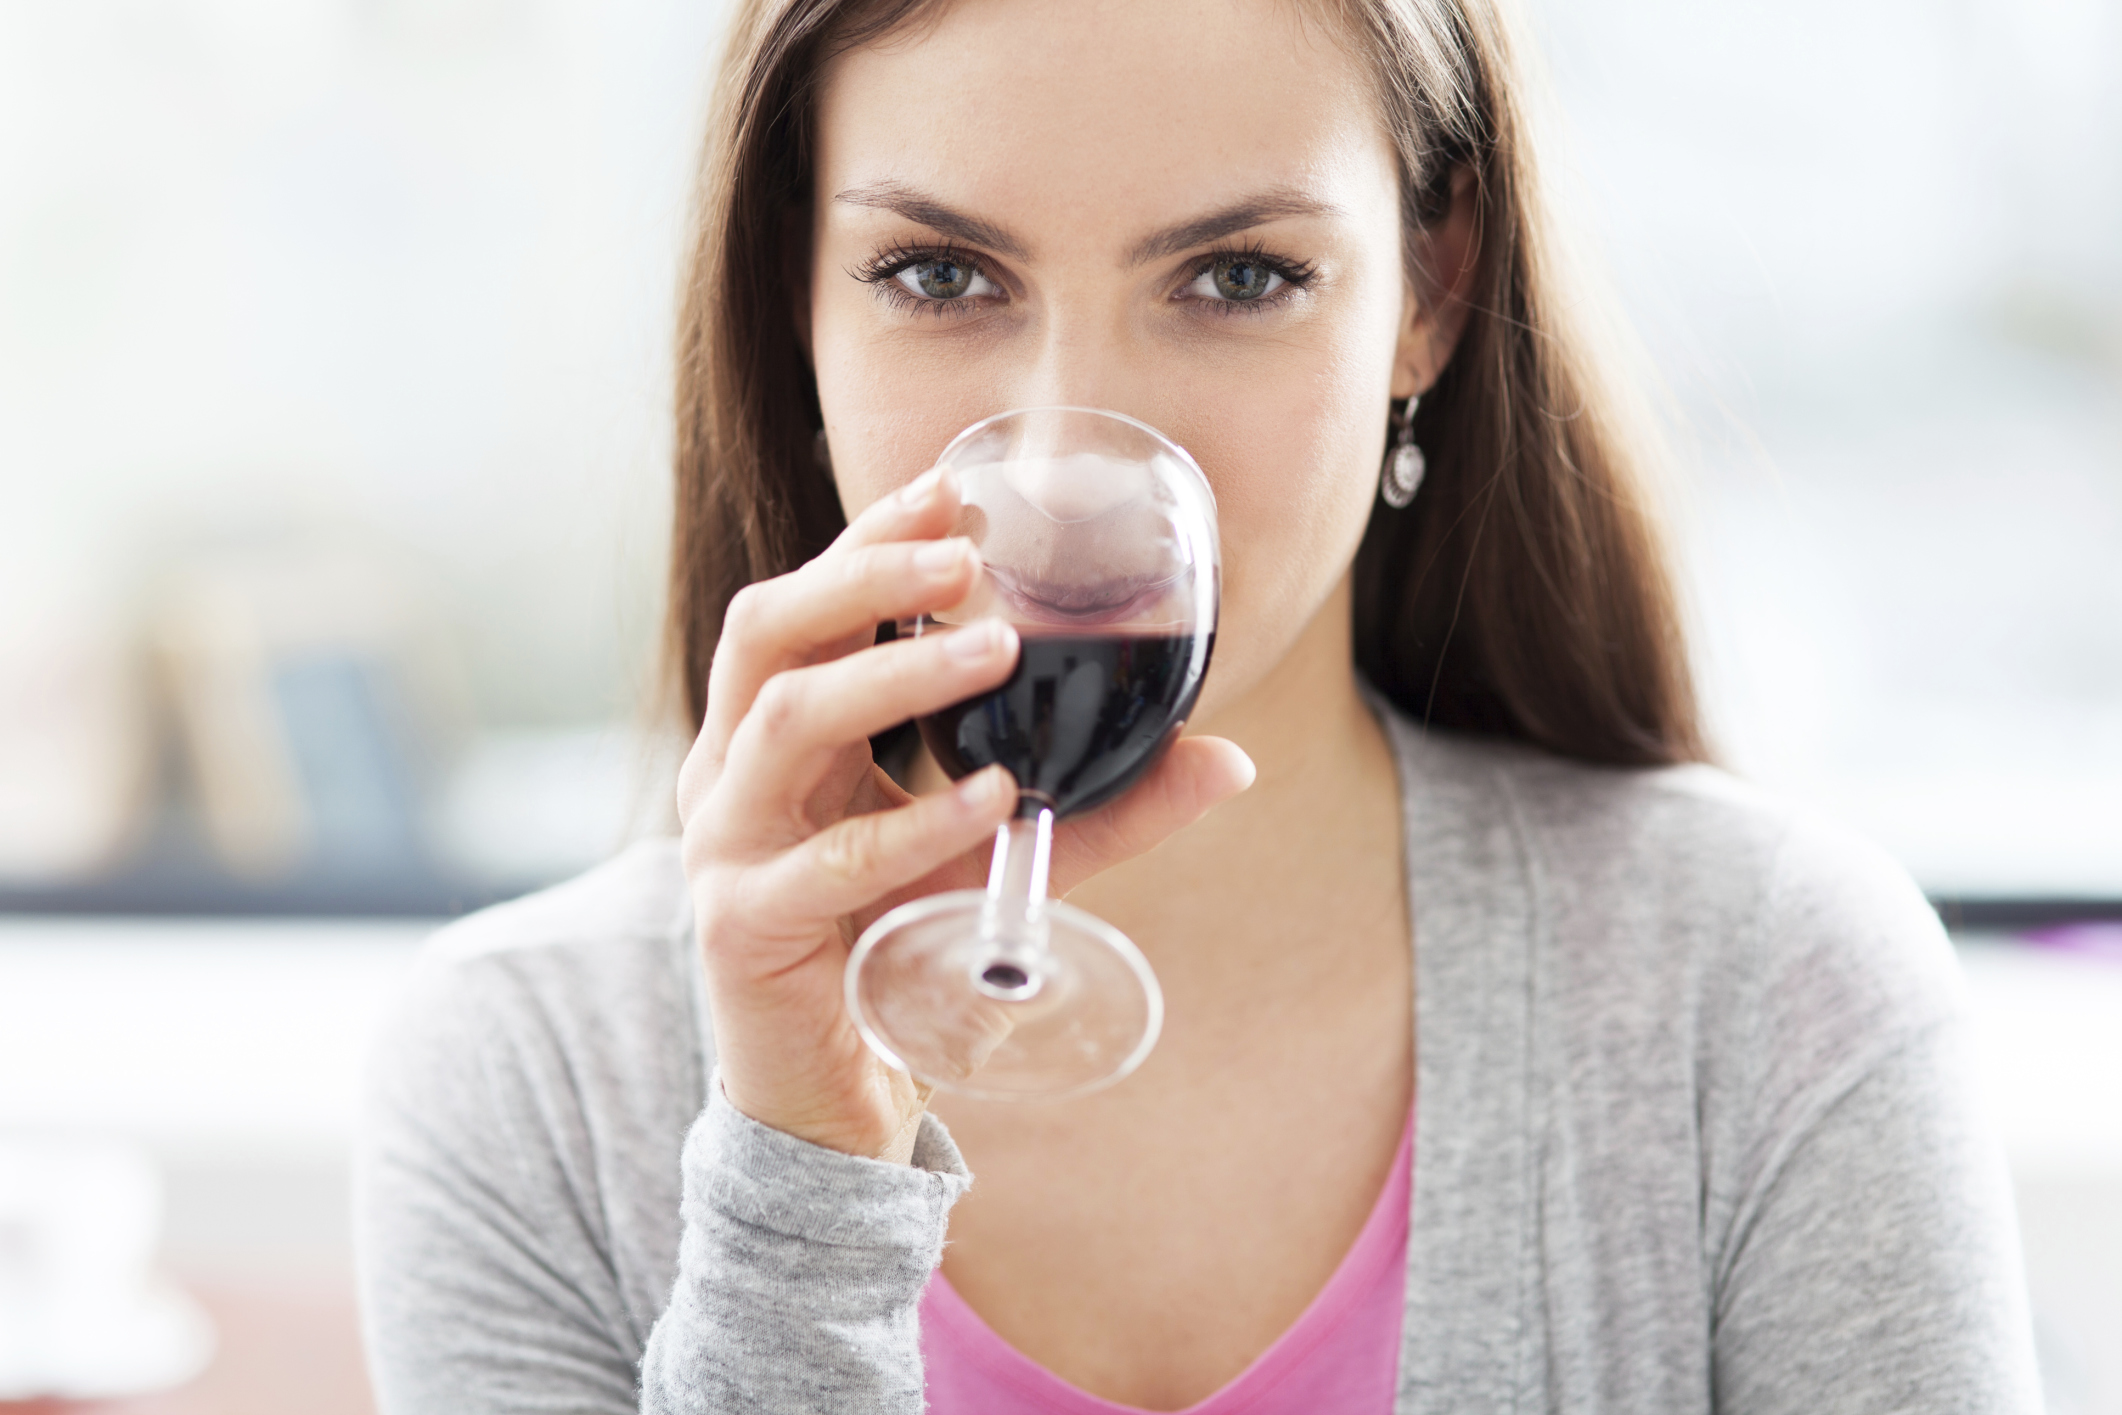 Red Wine Linked To Female Sexual Desire– LifeStyles Condoms